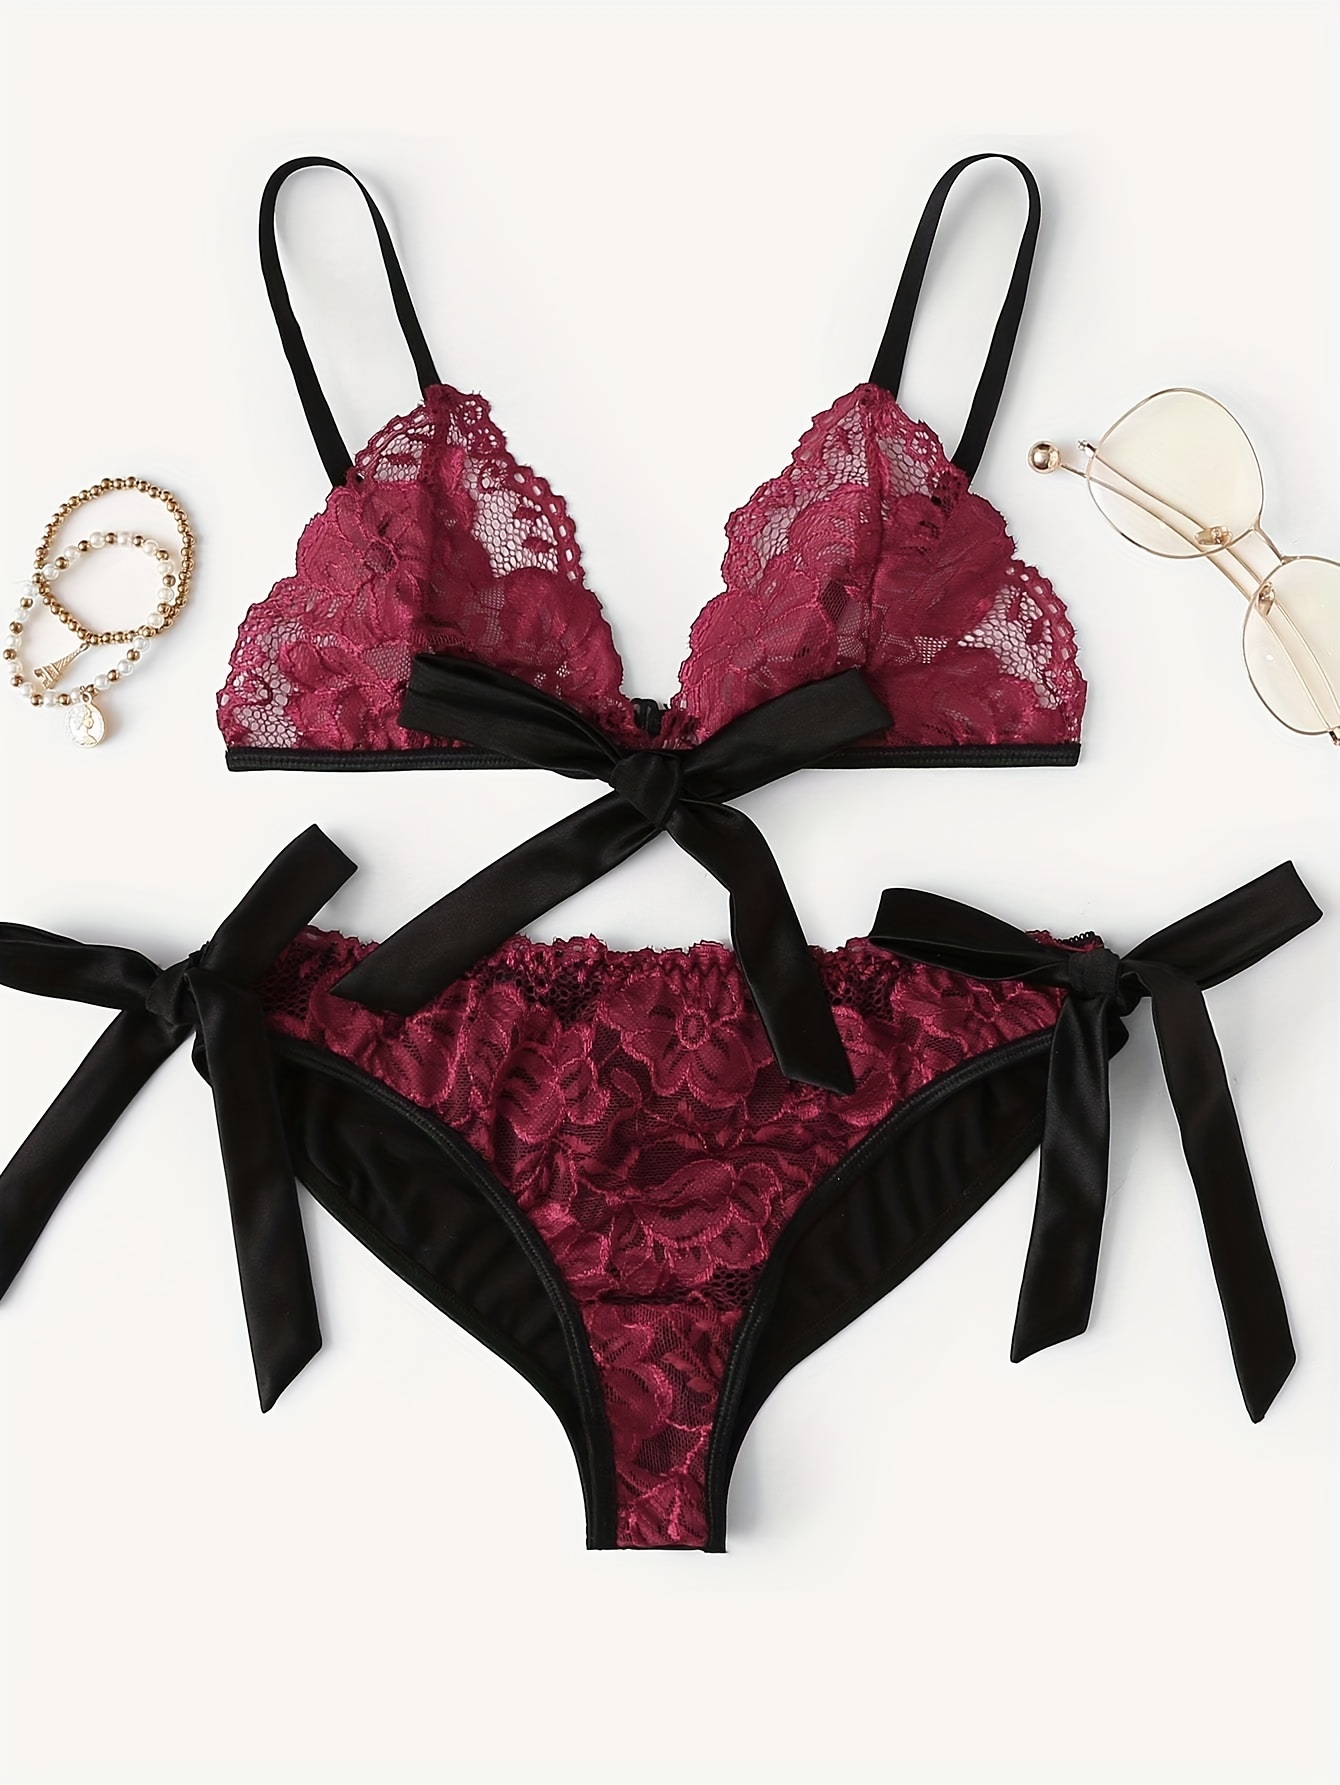 Sexy Lace Lingerie Set with Strappy Bow Bra and Cheeky Panties for Women